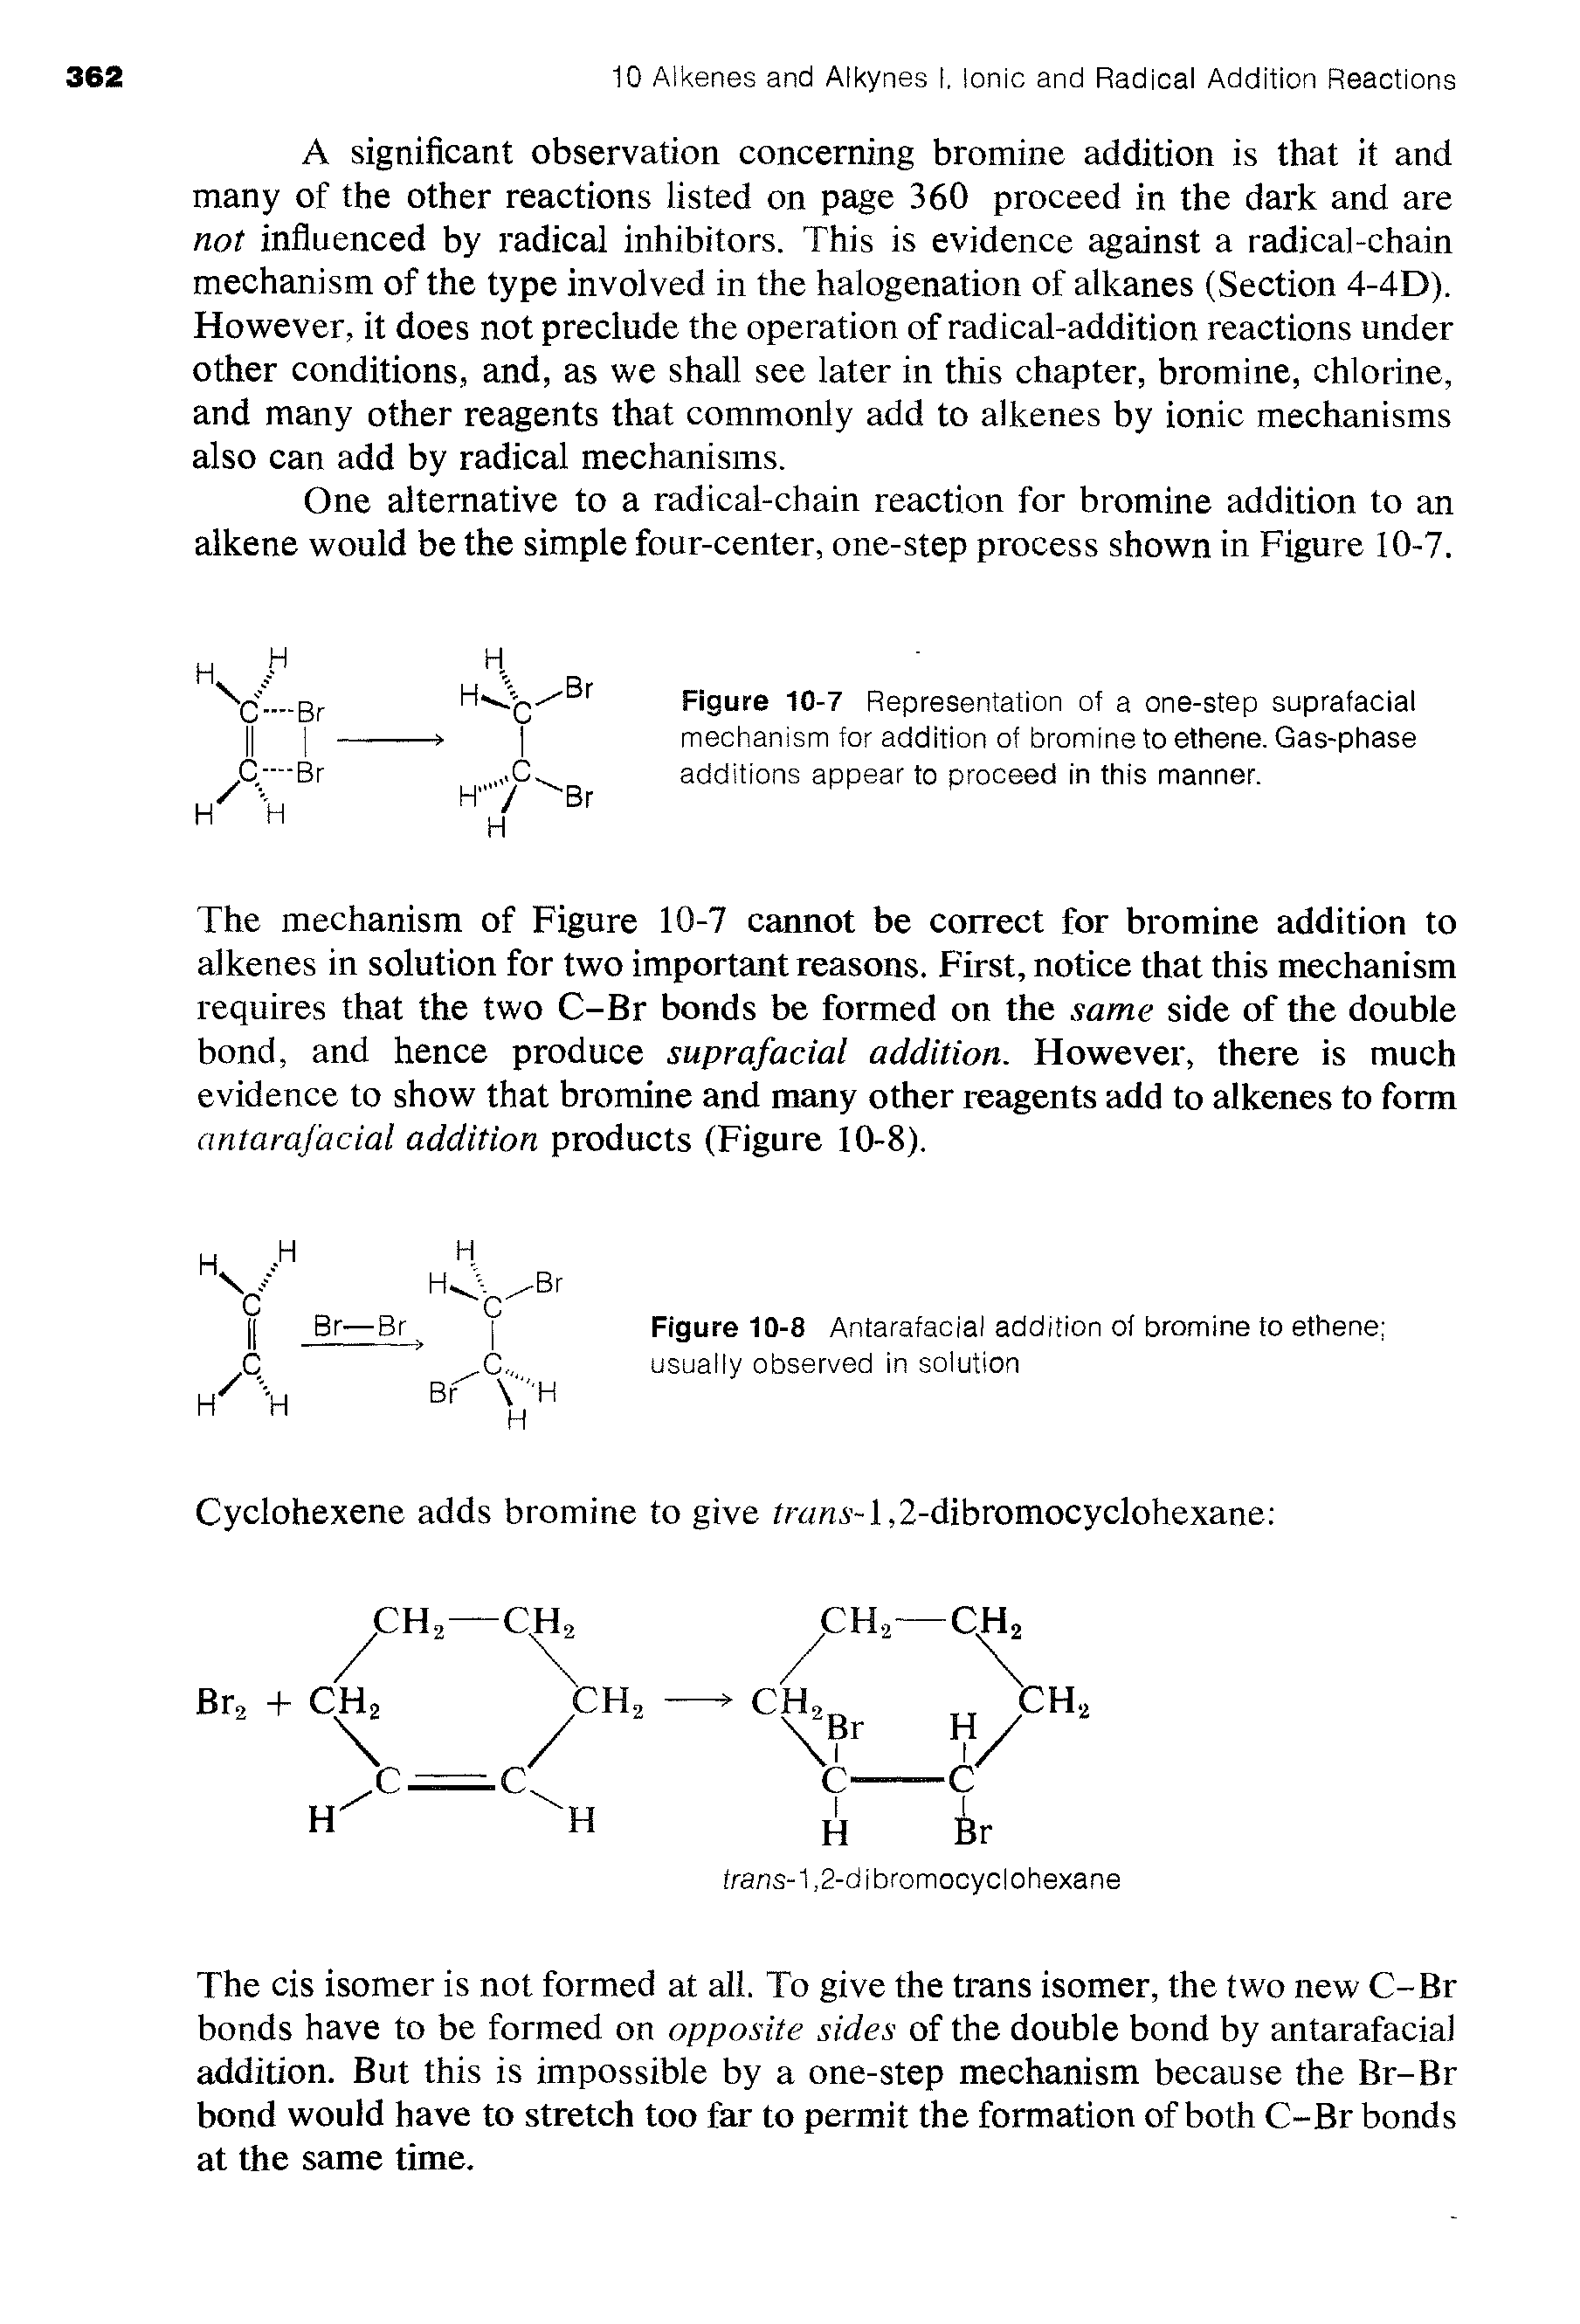 Figure 10-8 Antarafacial addition of bromine to ethene usually observed in solution...